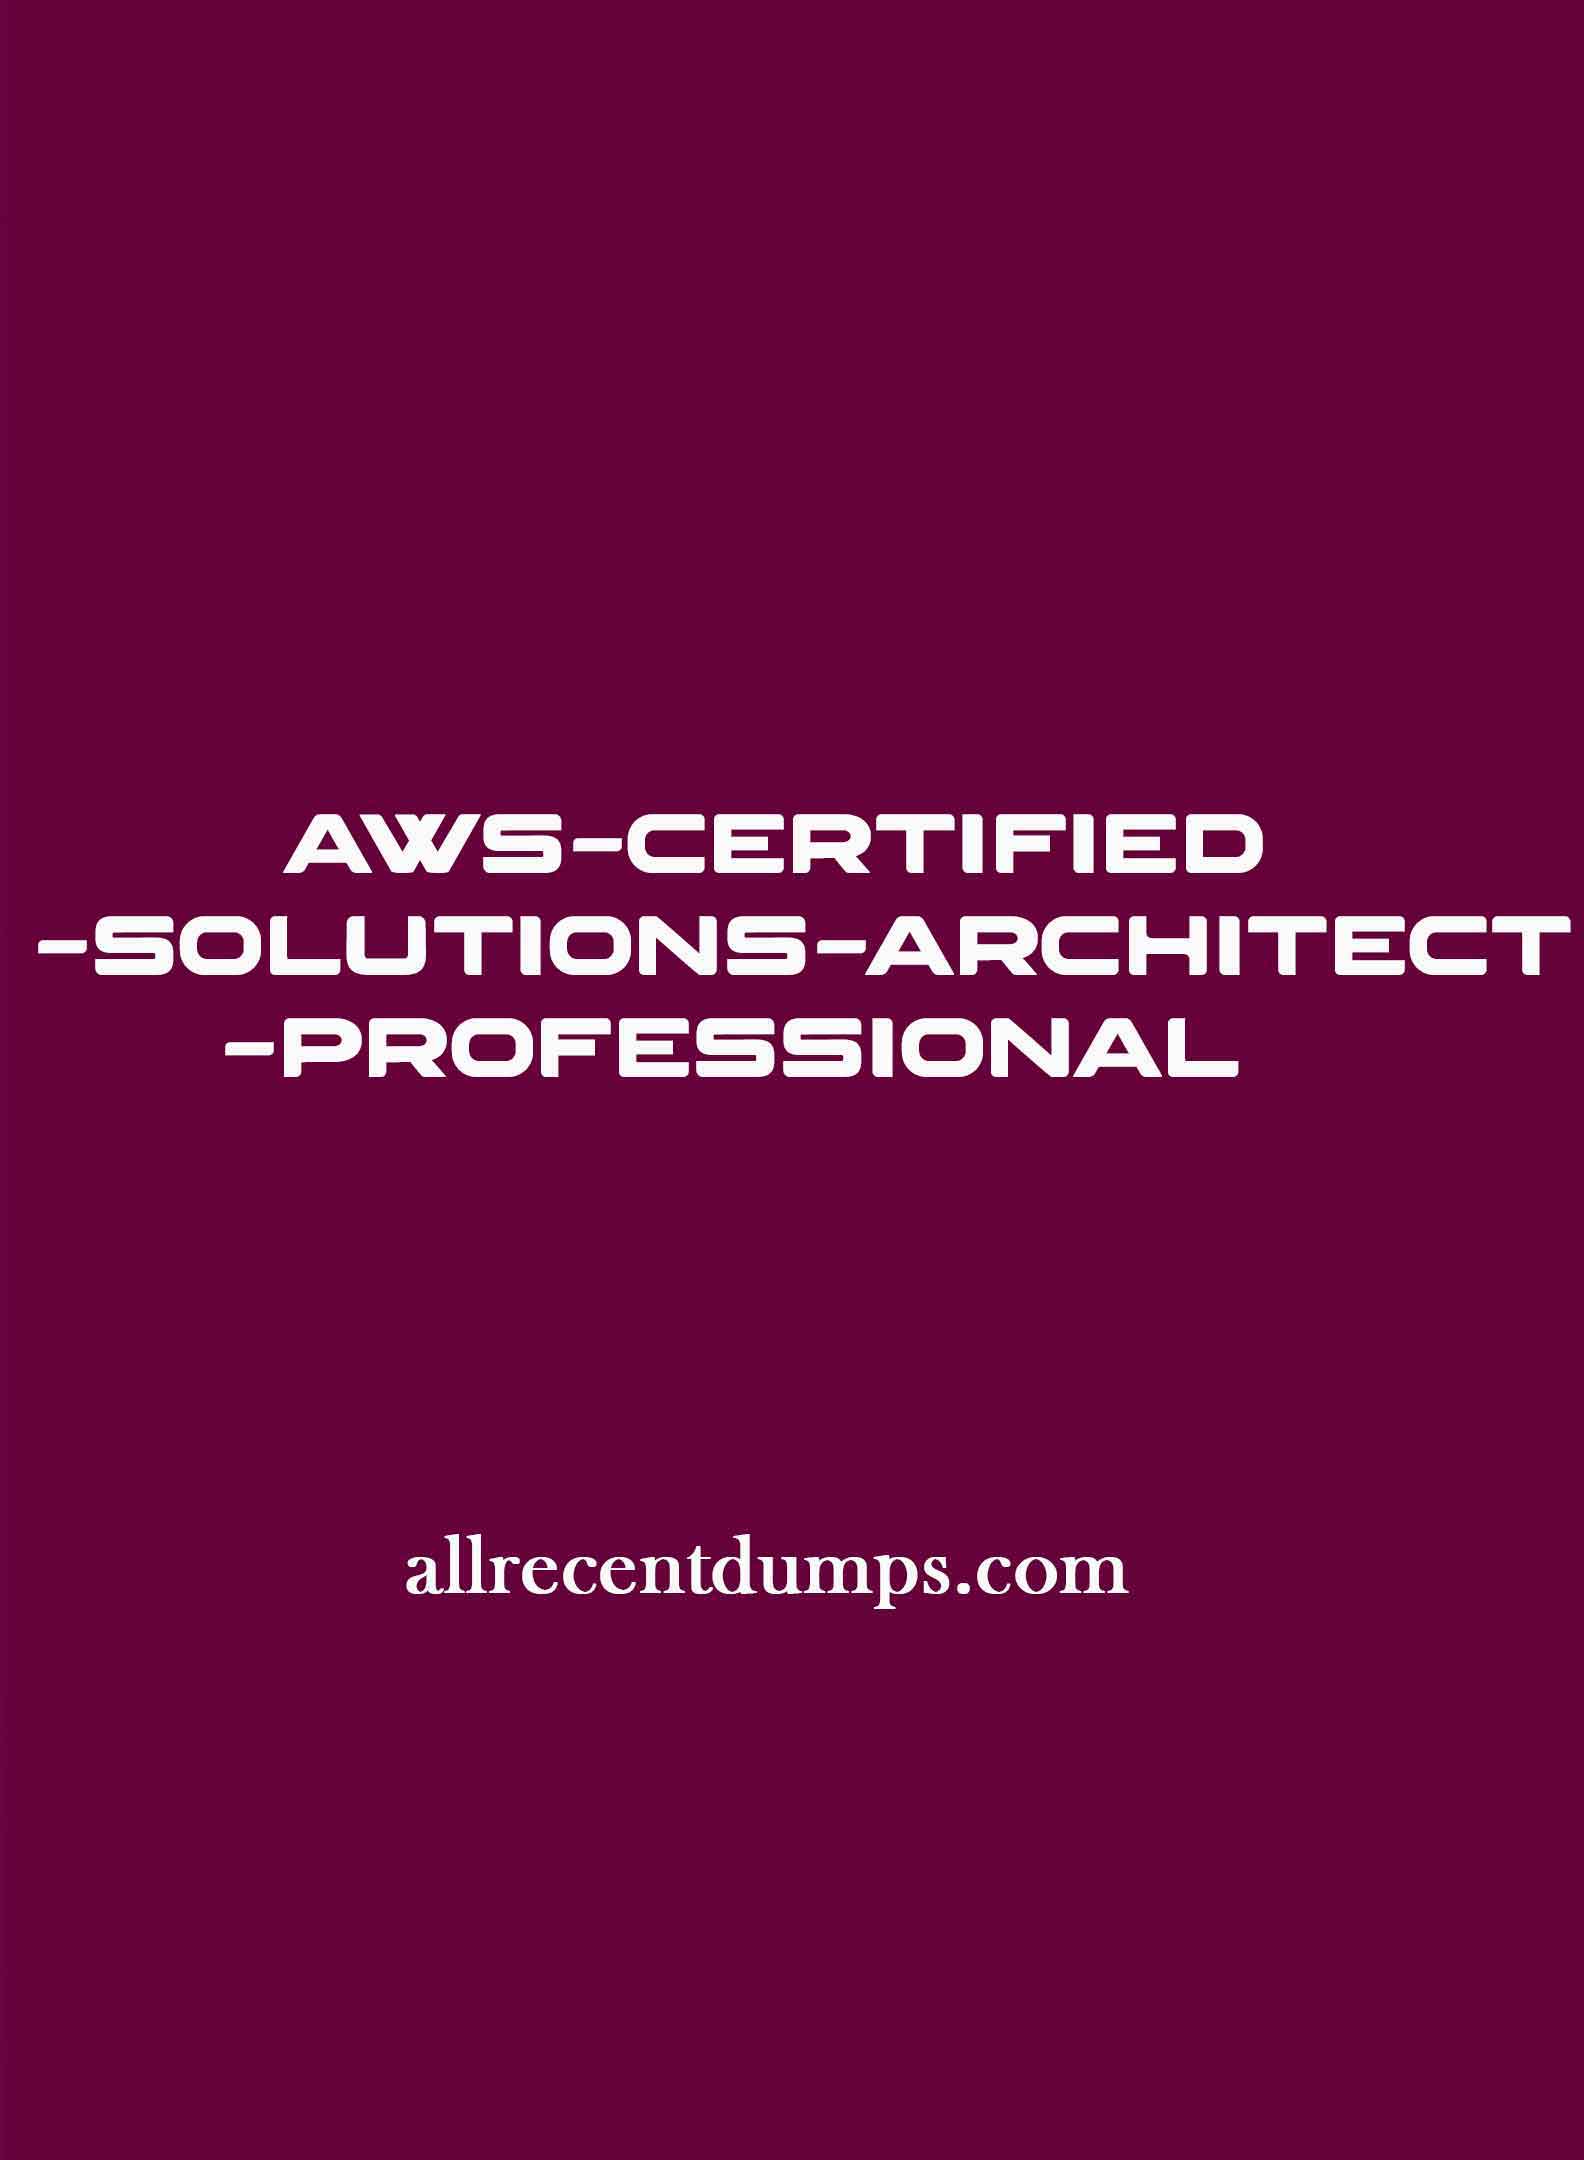 AWS Certified Solutions Architect Professional Dumps